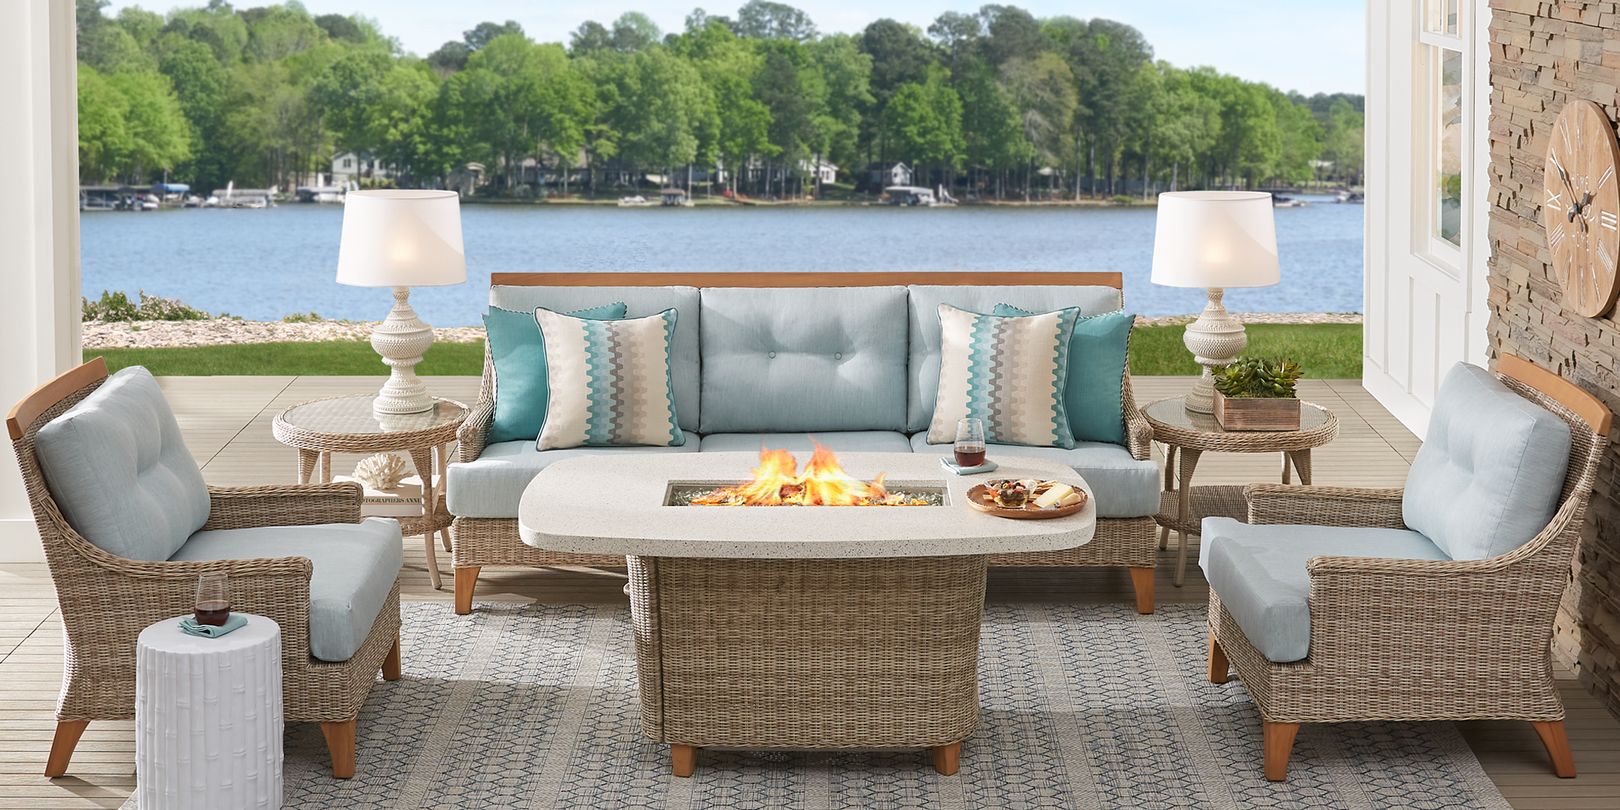 Photo of wicker patio seating set with seafoam cushions